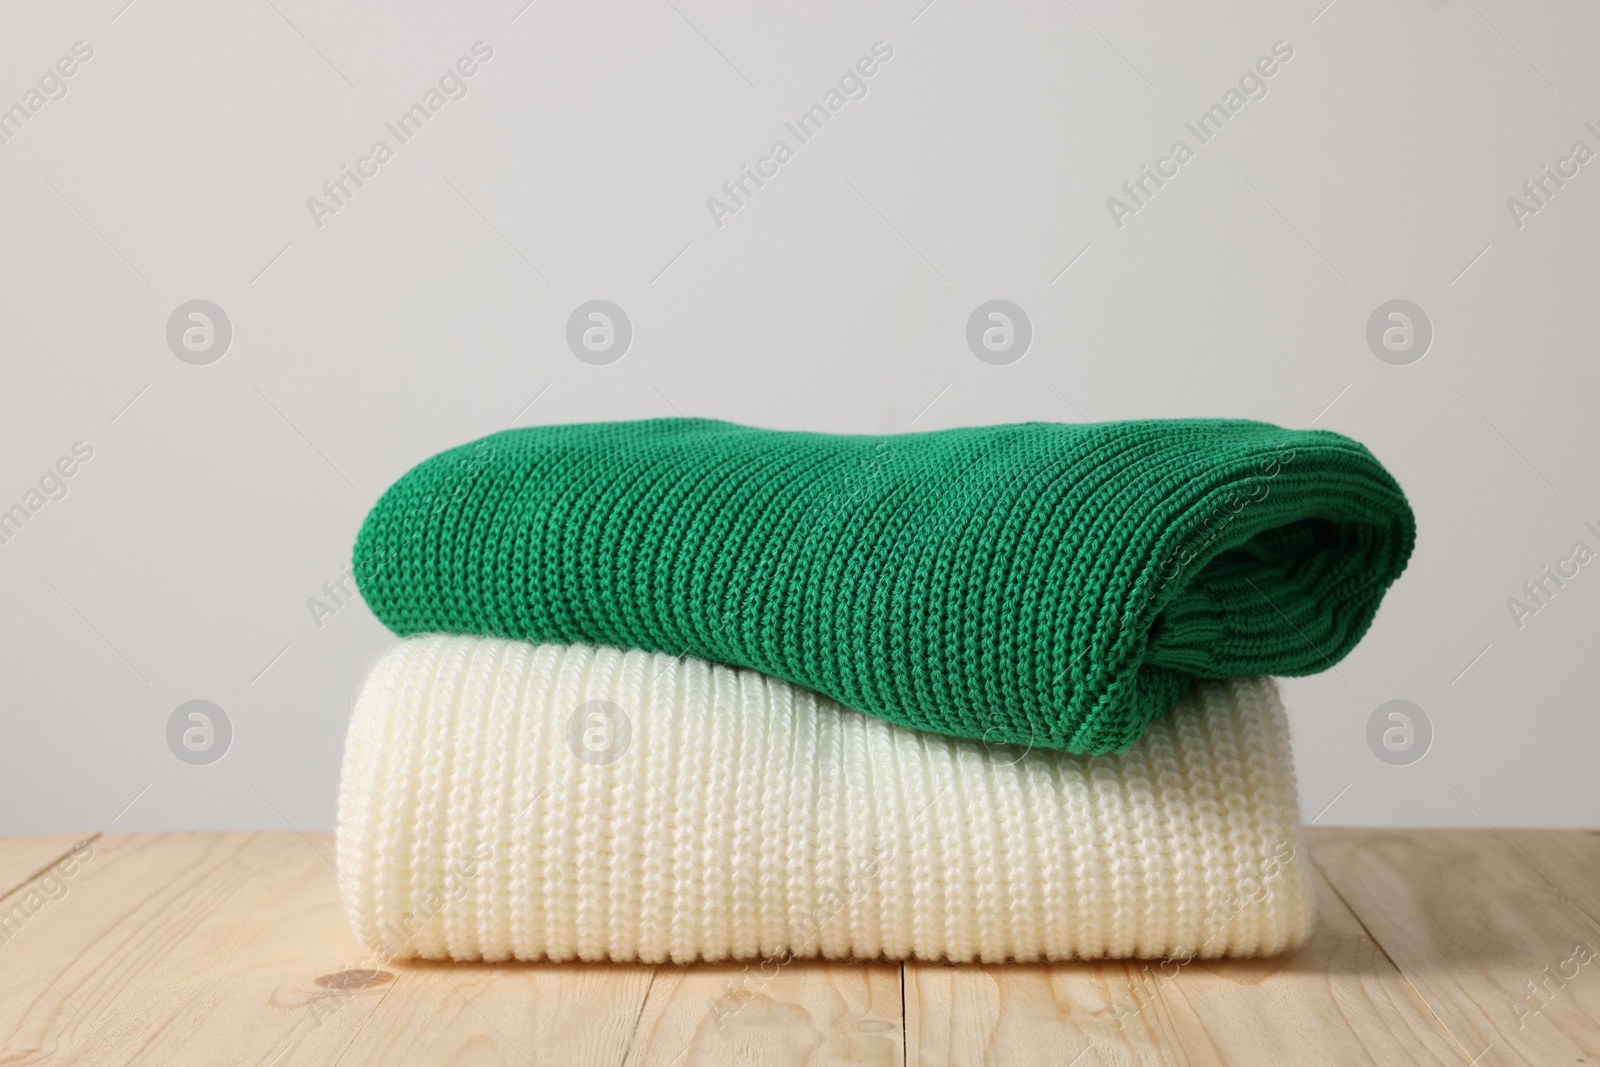 Photo of Folded knitted sweaters on wooden table against light background